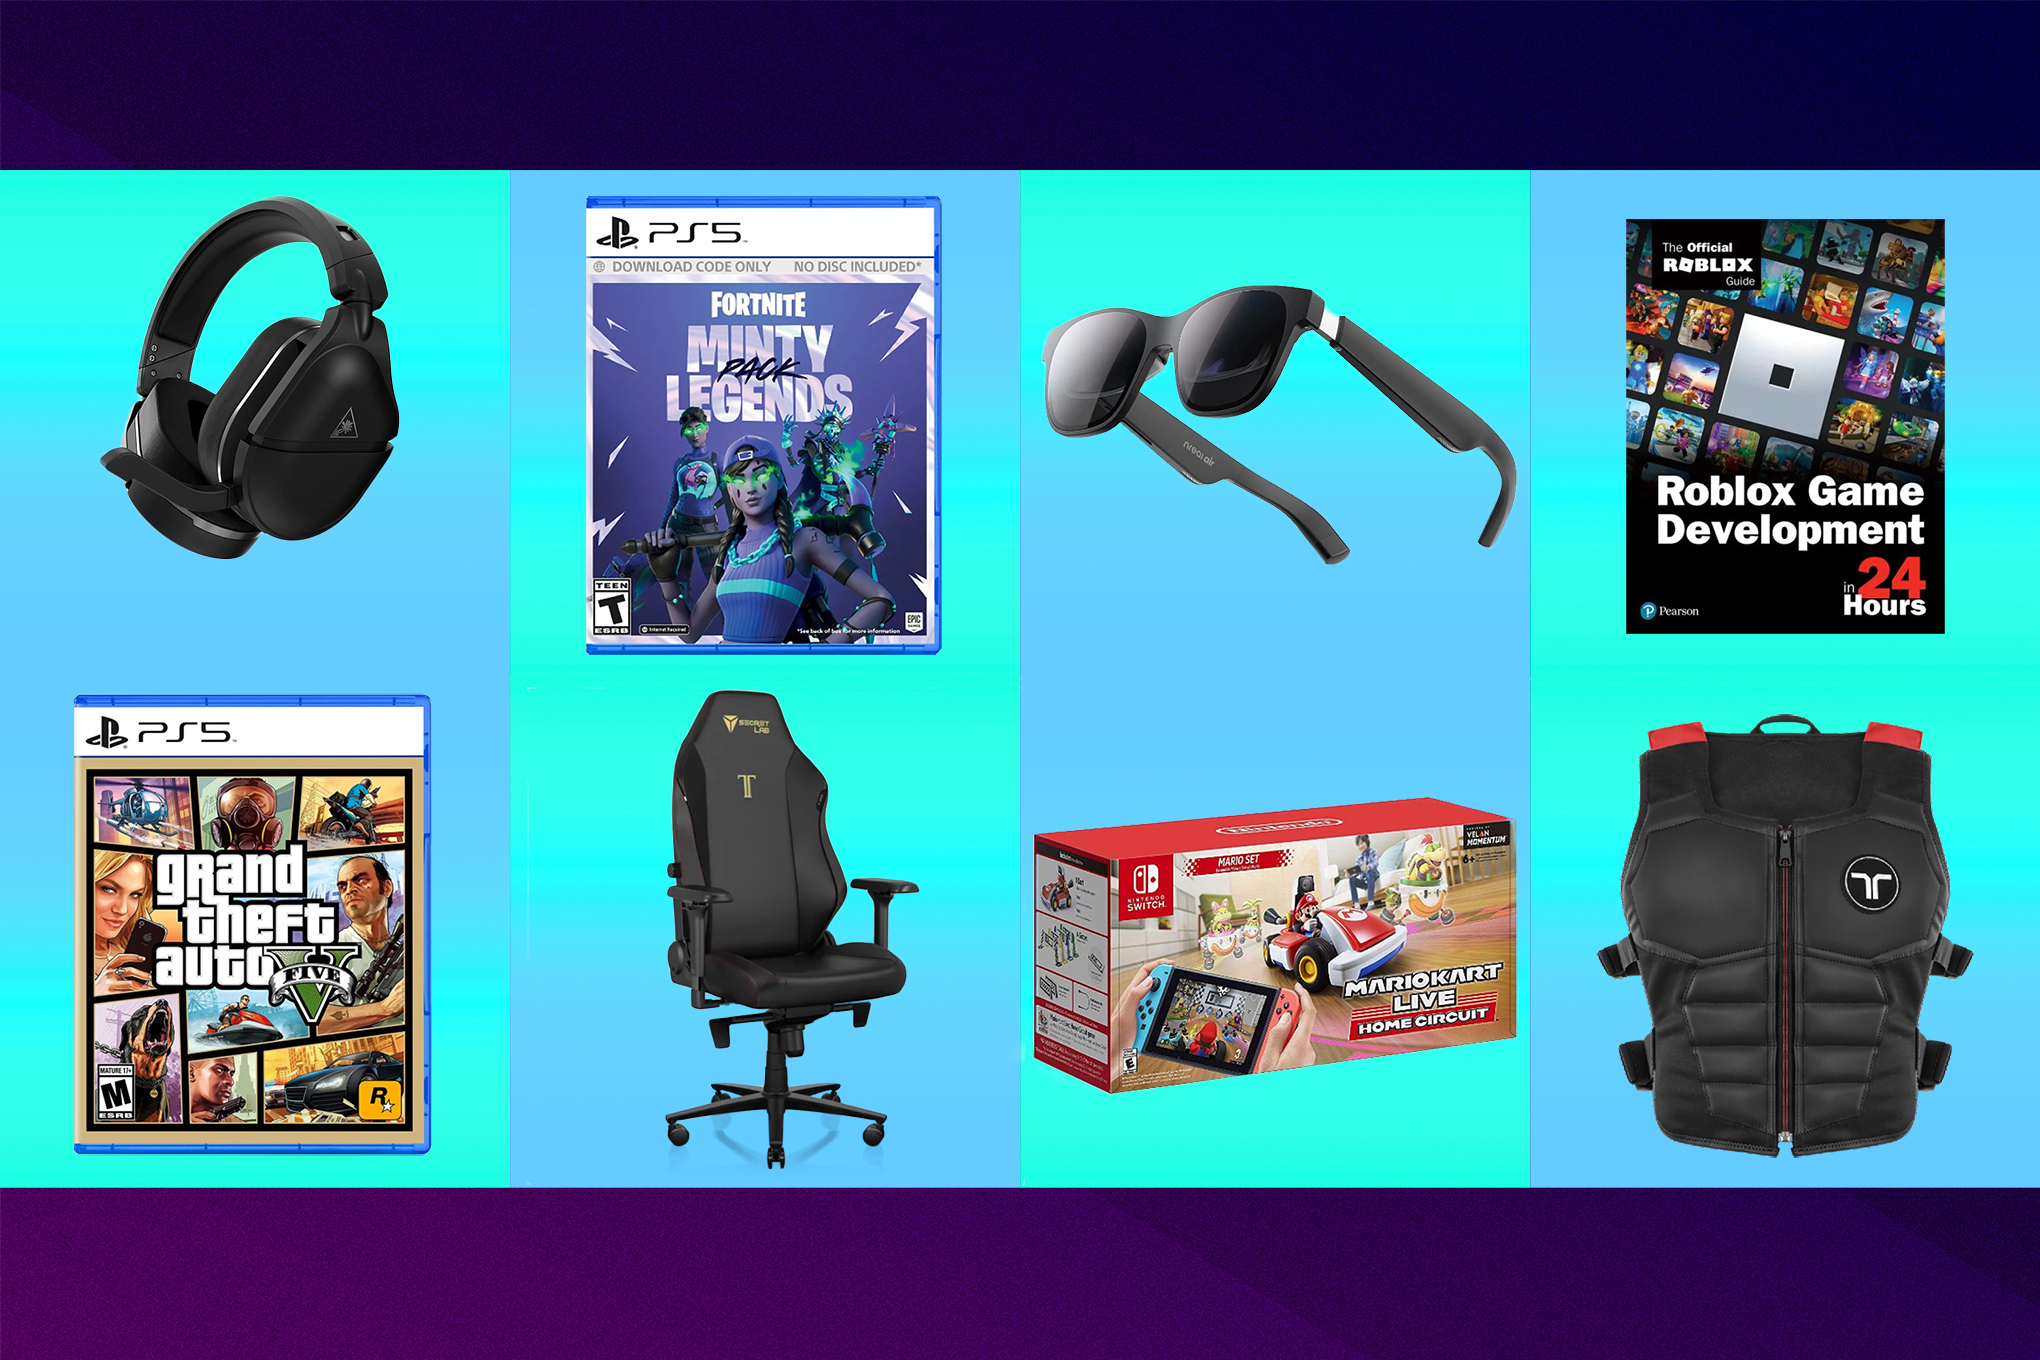 A grid shows product images of items such as gaming chairs, Grand Theft Auto 5, and Mario Kart Live.